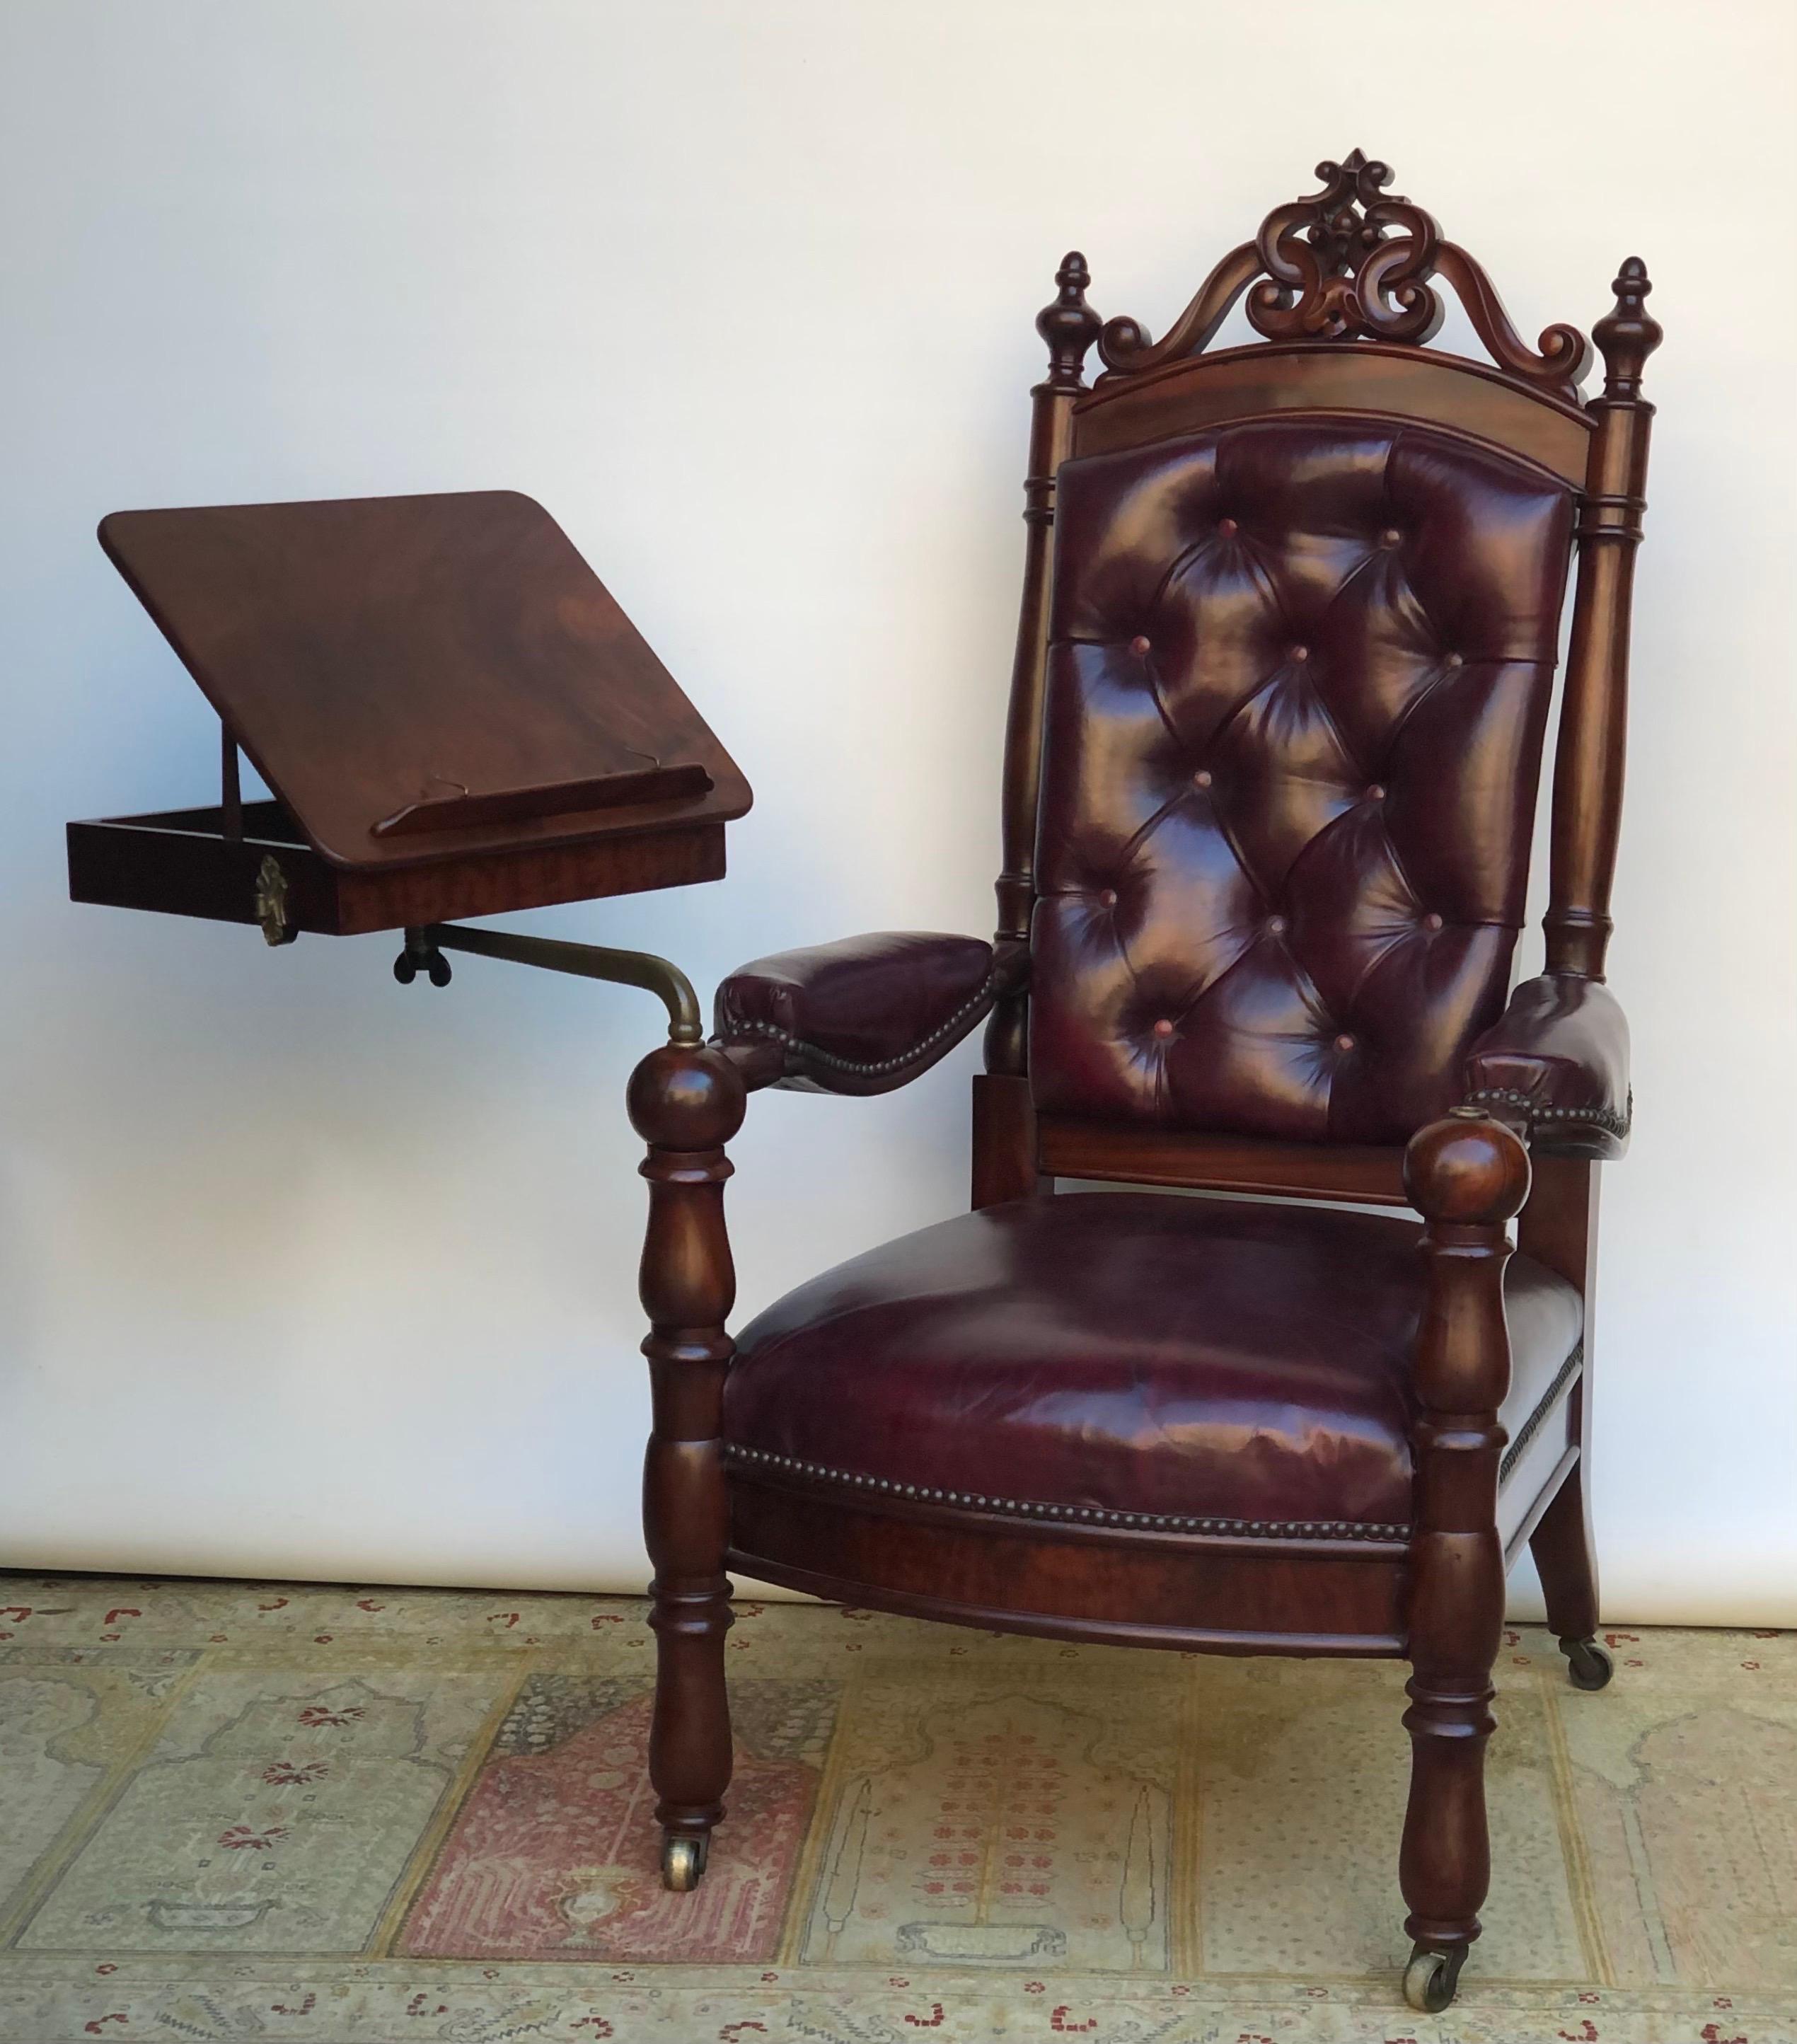 This Regal Mahogany leather reading / library arm chair can be used with or without the reading stand and was made in America in the early 19th century. The American Reading Arm Chair has a solid mahogany frame with an adjustable reading stand that